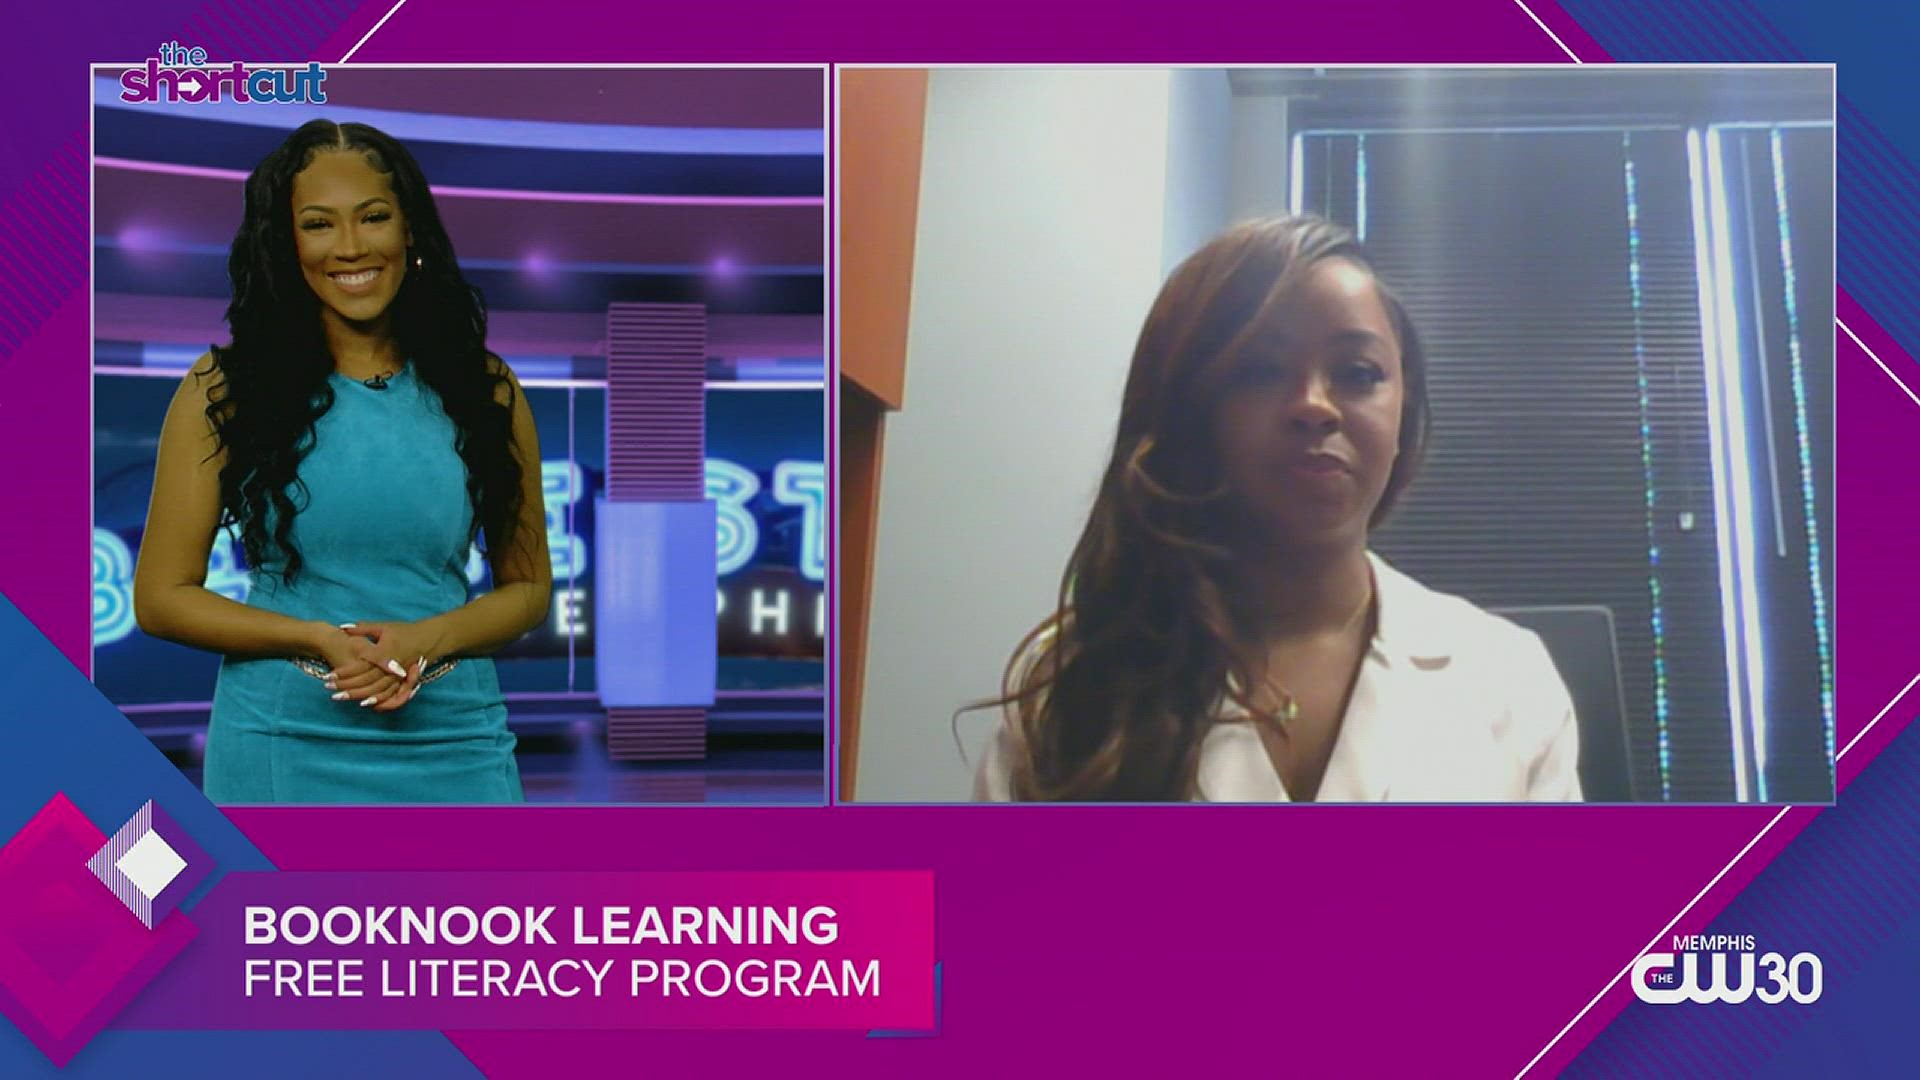 Get an insight on how Methodist Le Bonheur and Booknook are increasing literacy with lifestyle host Sydney Neely and Booknook learning impact manager Janel Bonds.